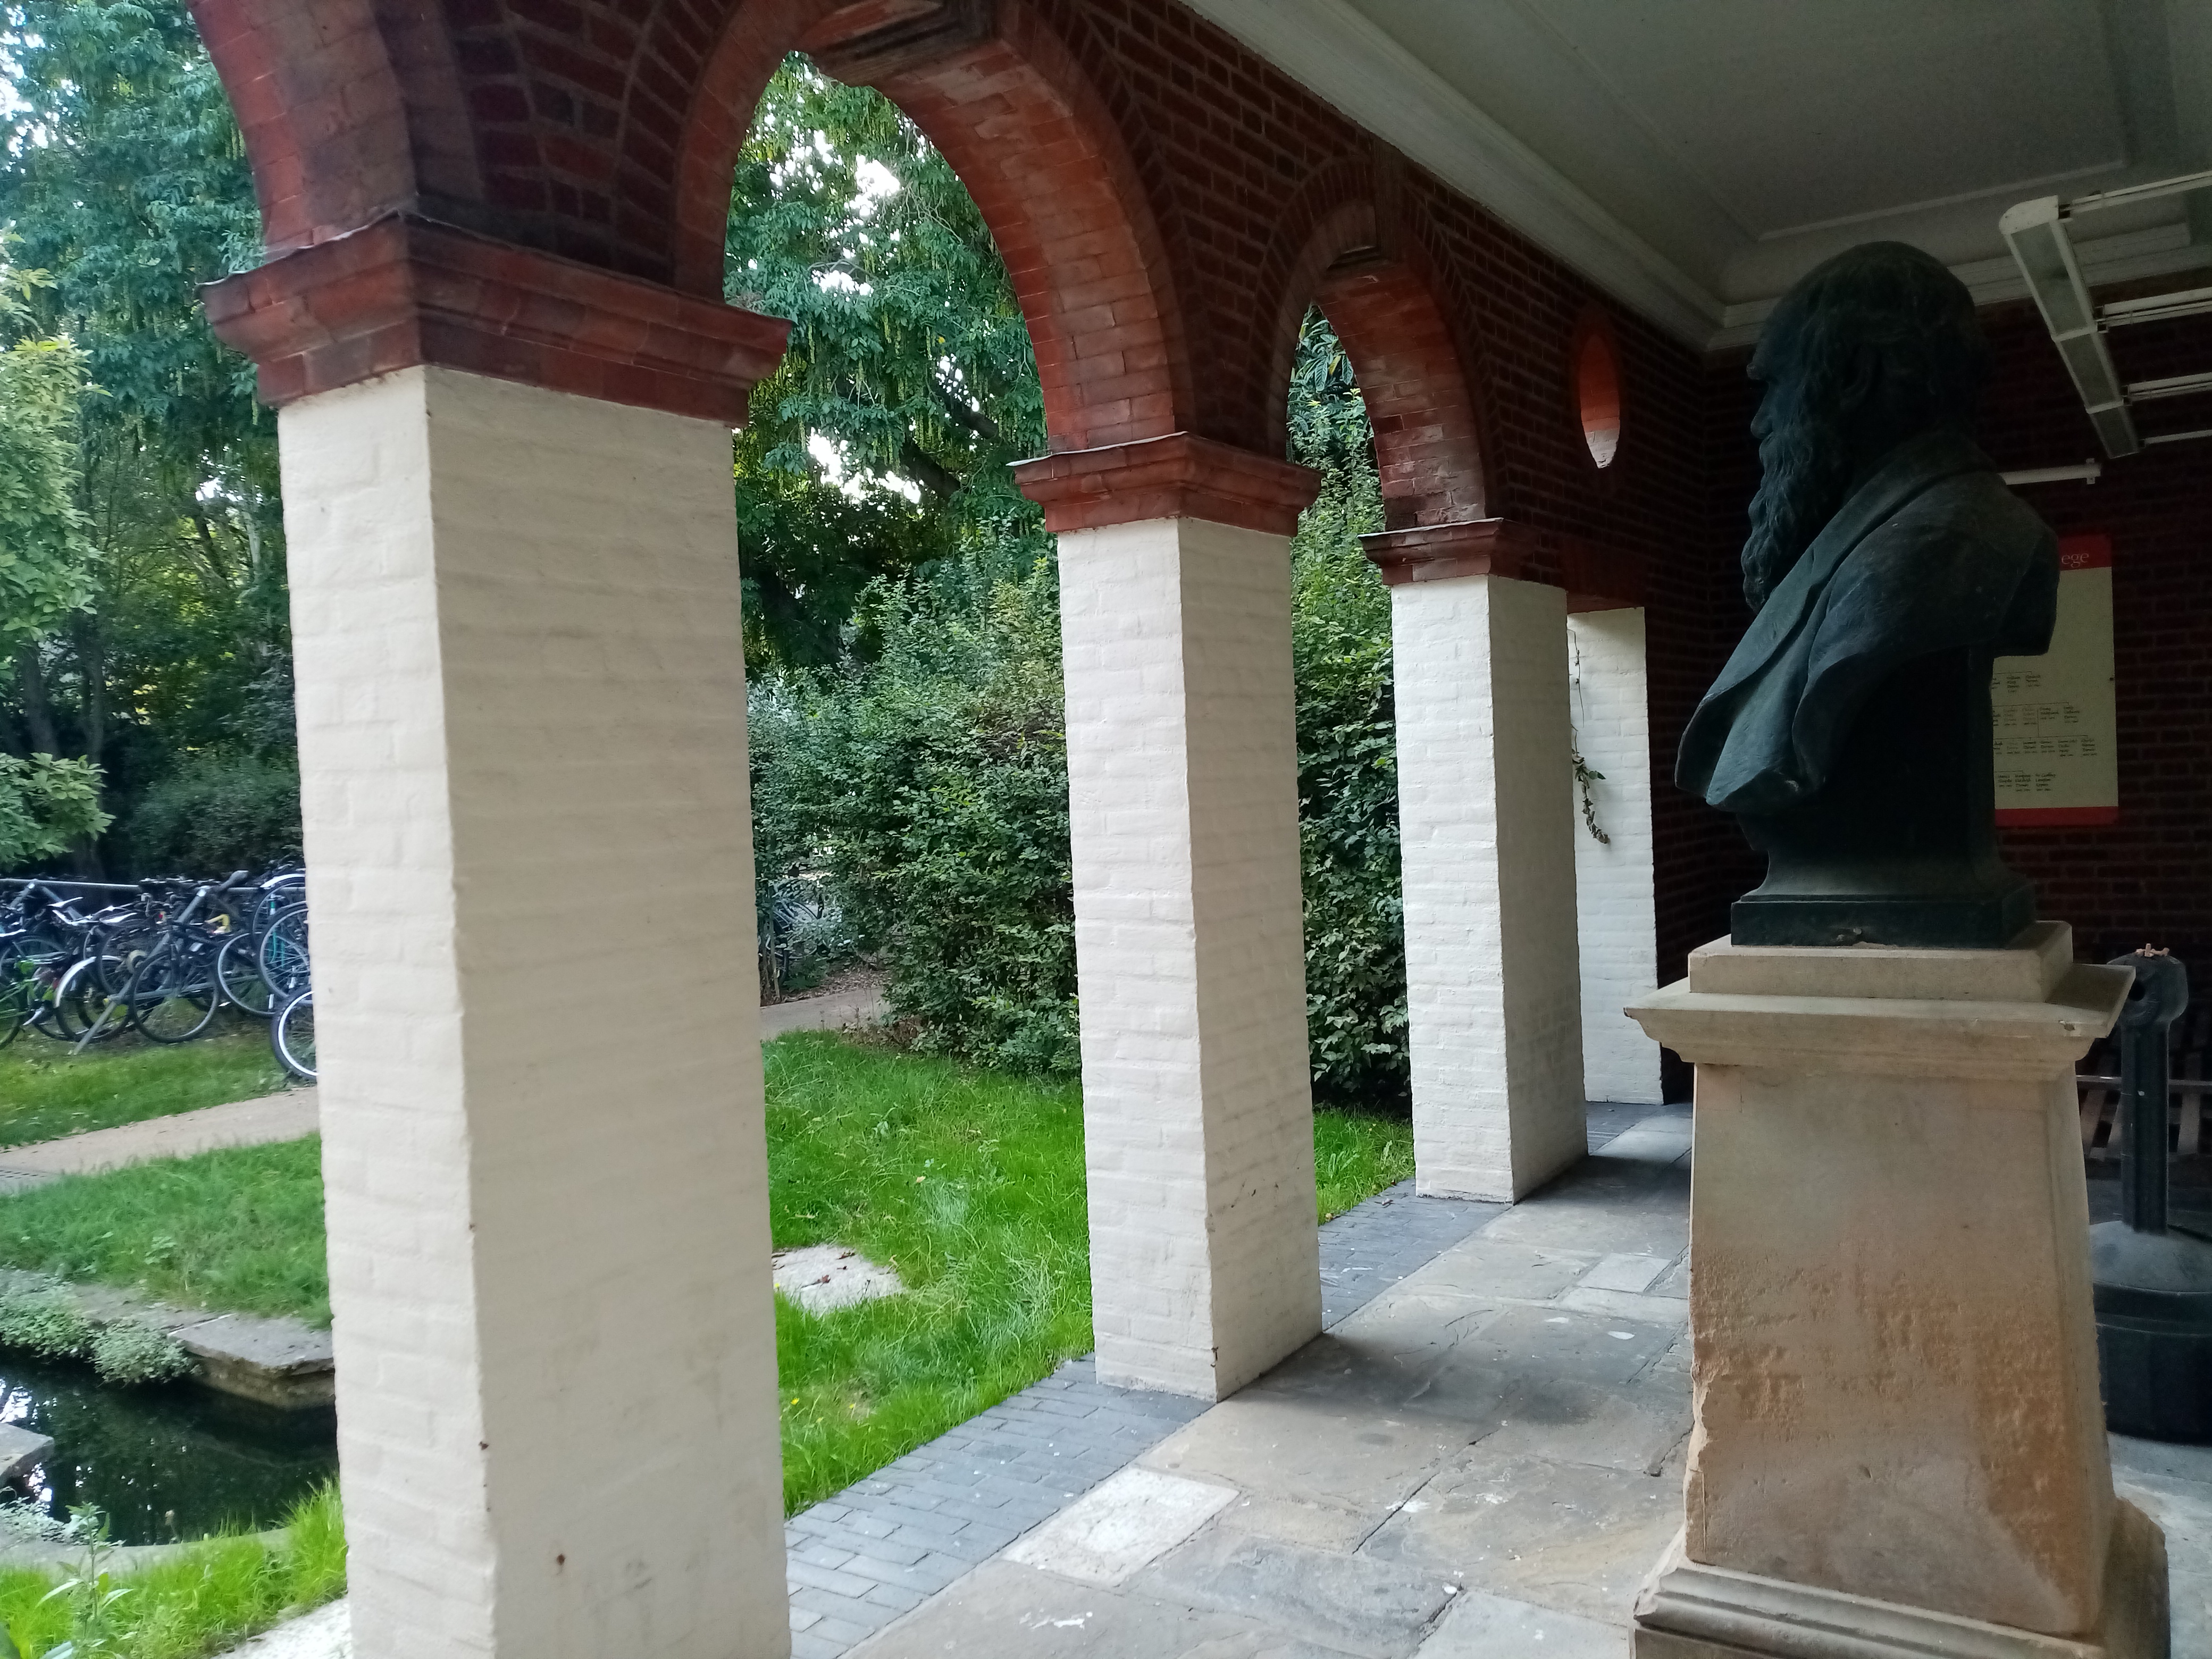 view from the Darwin portico: the back of a bust of Charles Darwin, and some arches that lead to green space